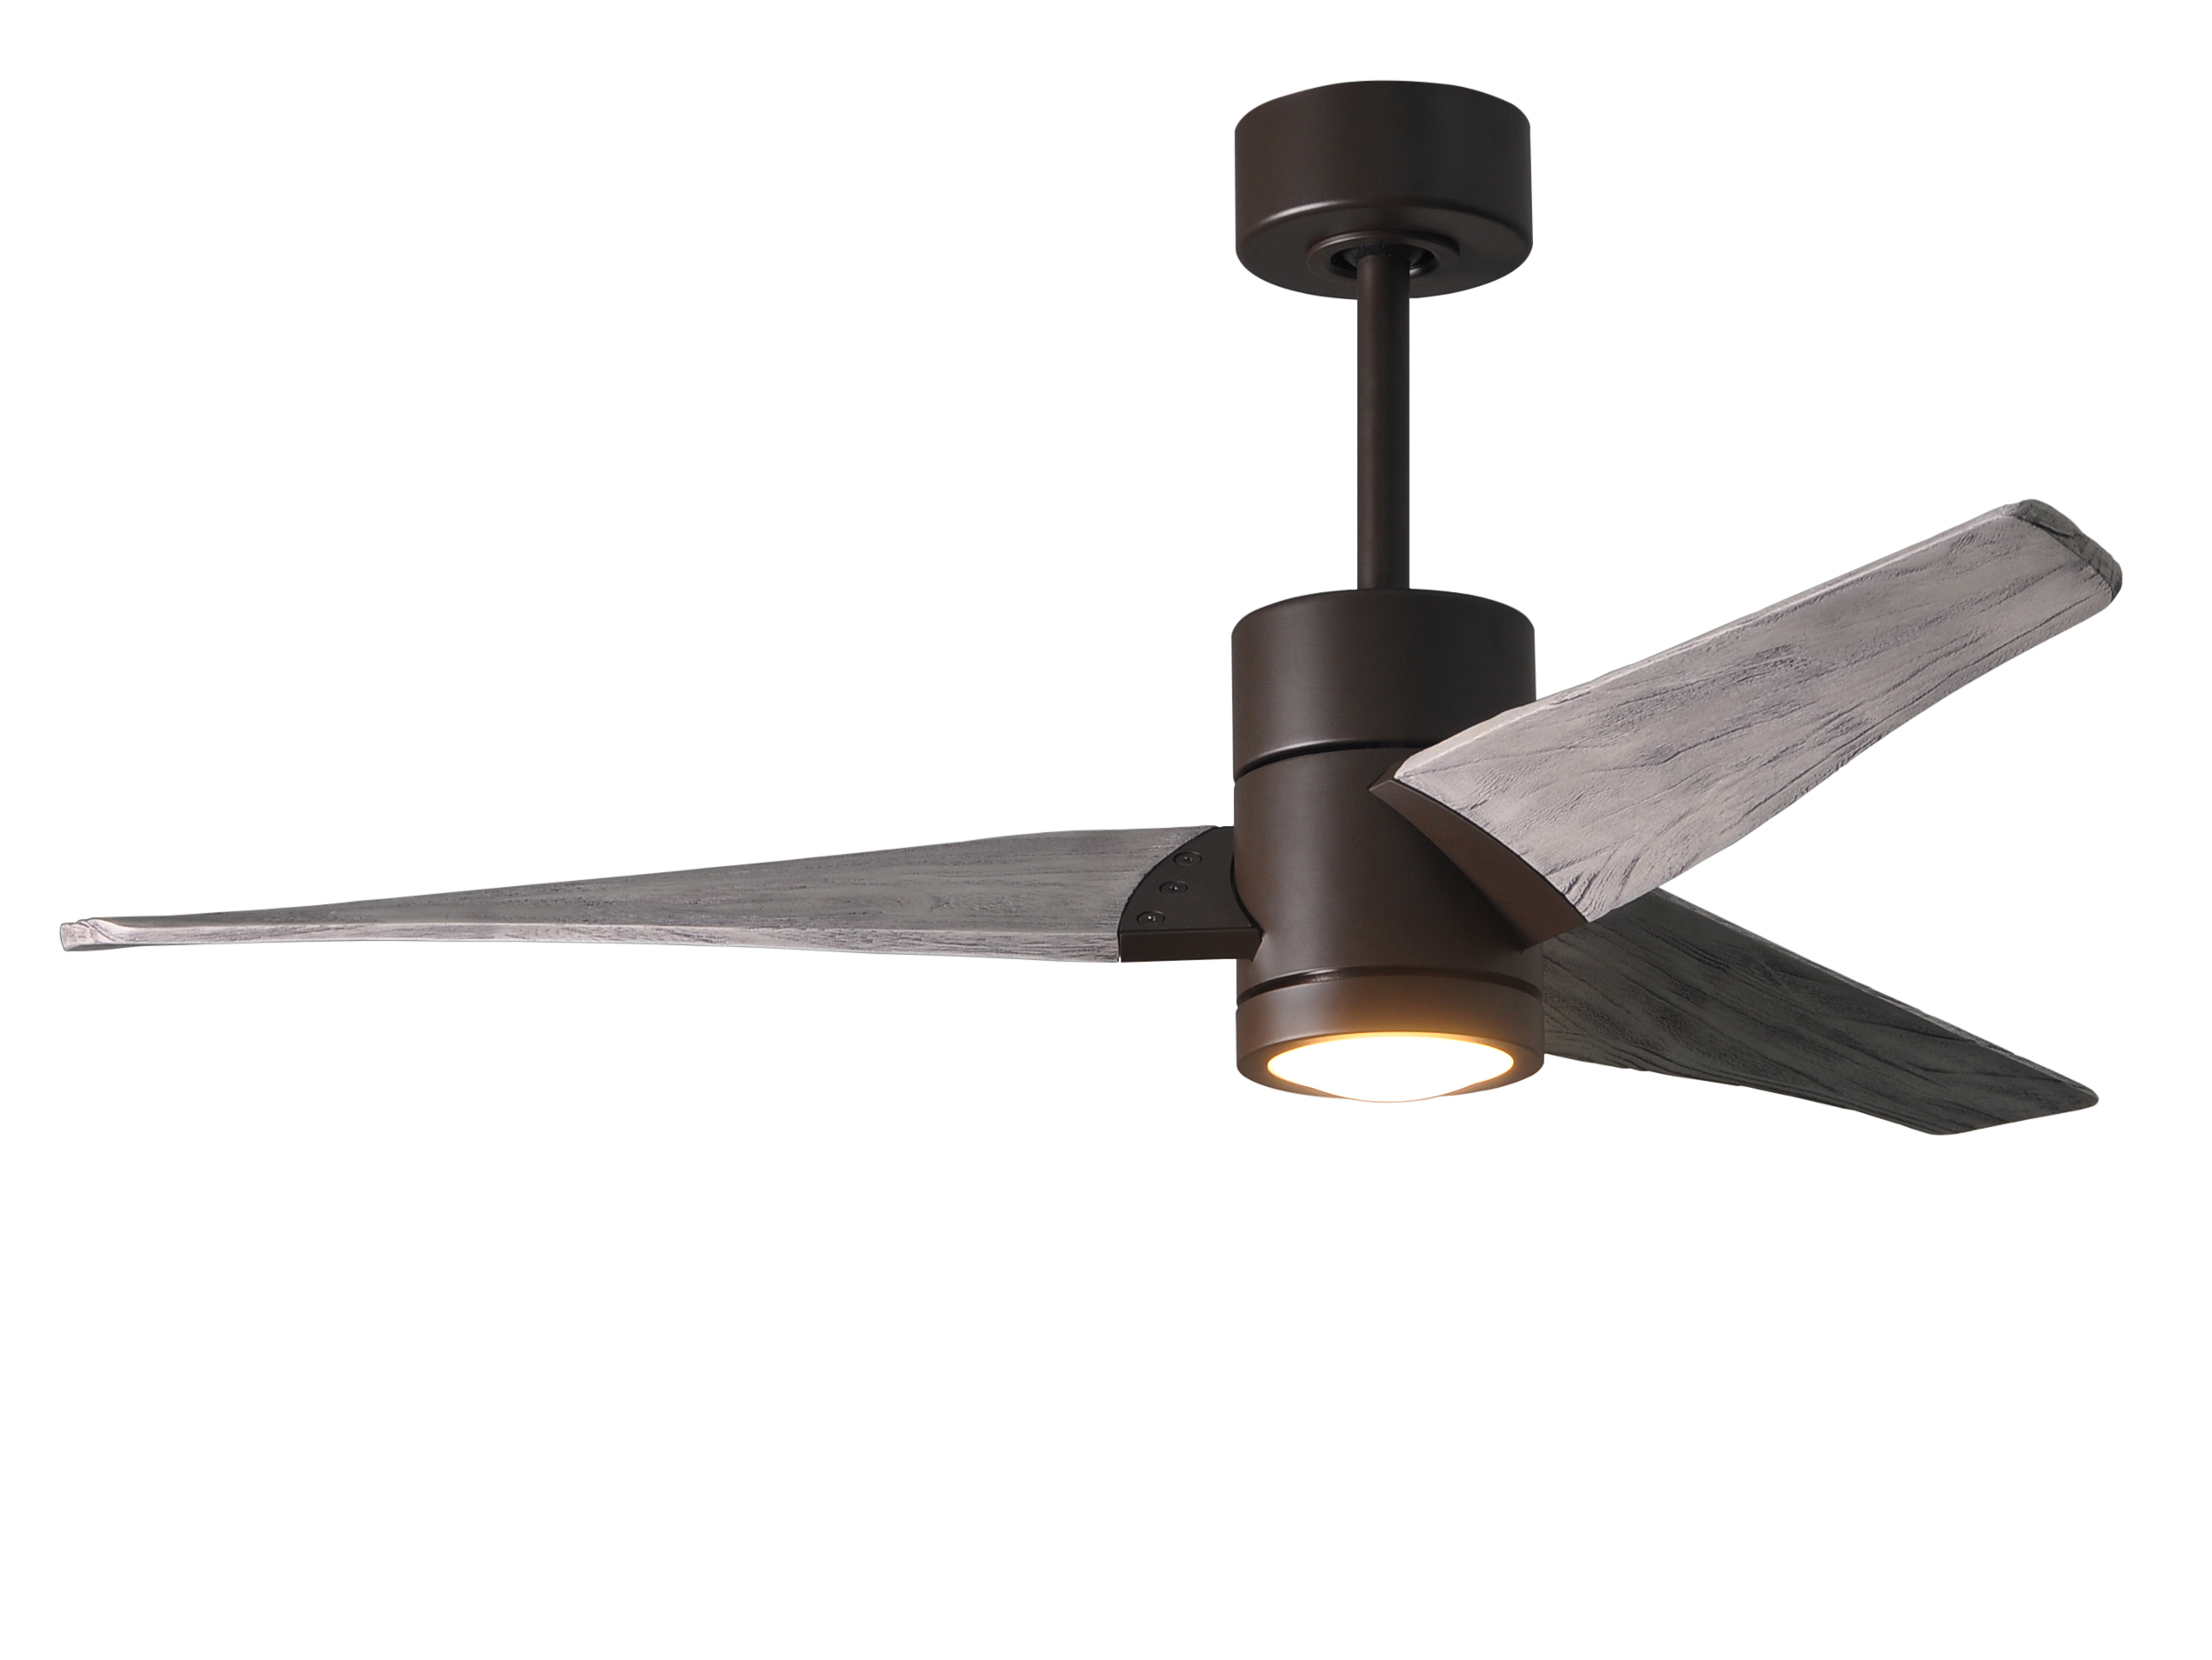 Super Janet Ceiling Fan in Textured Bronze with 52” Barn Wood Blades